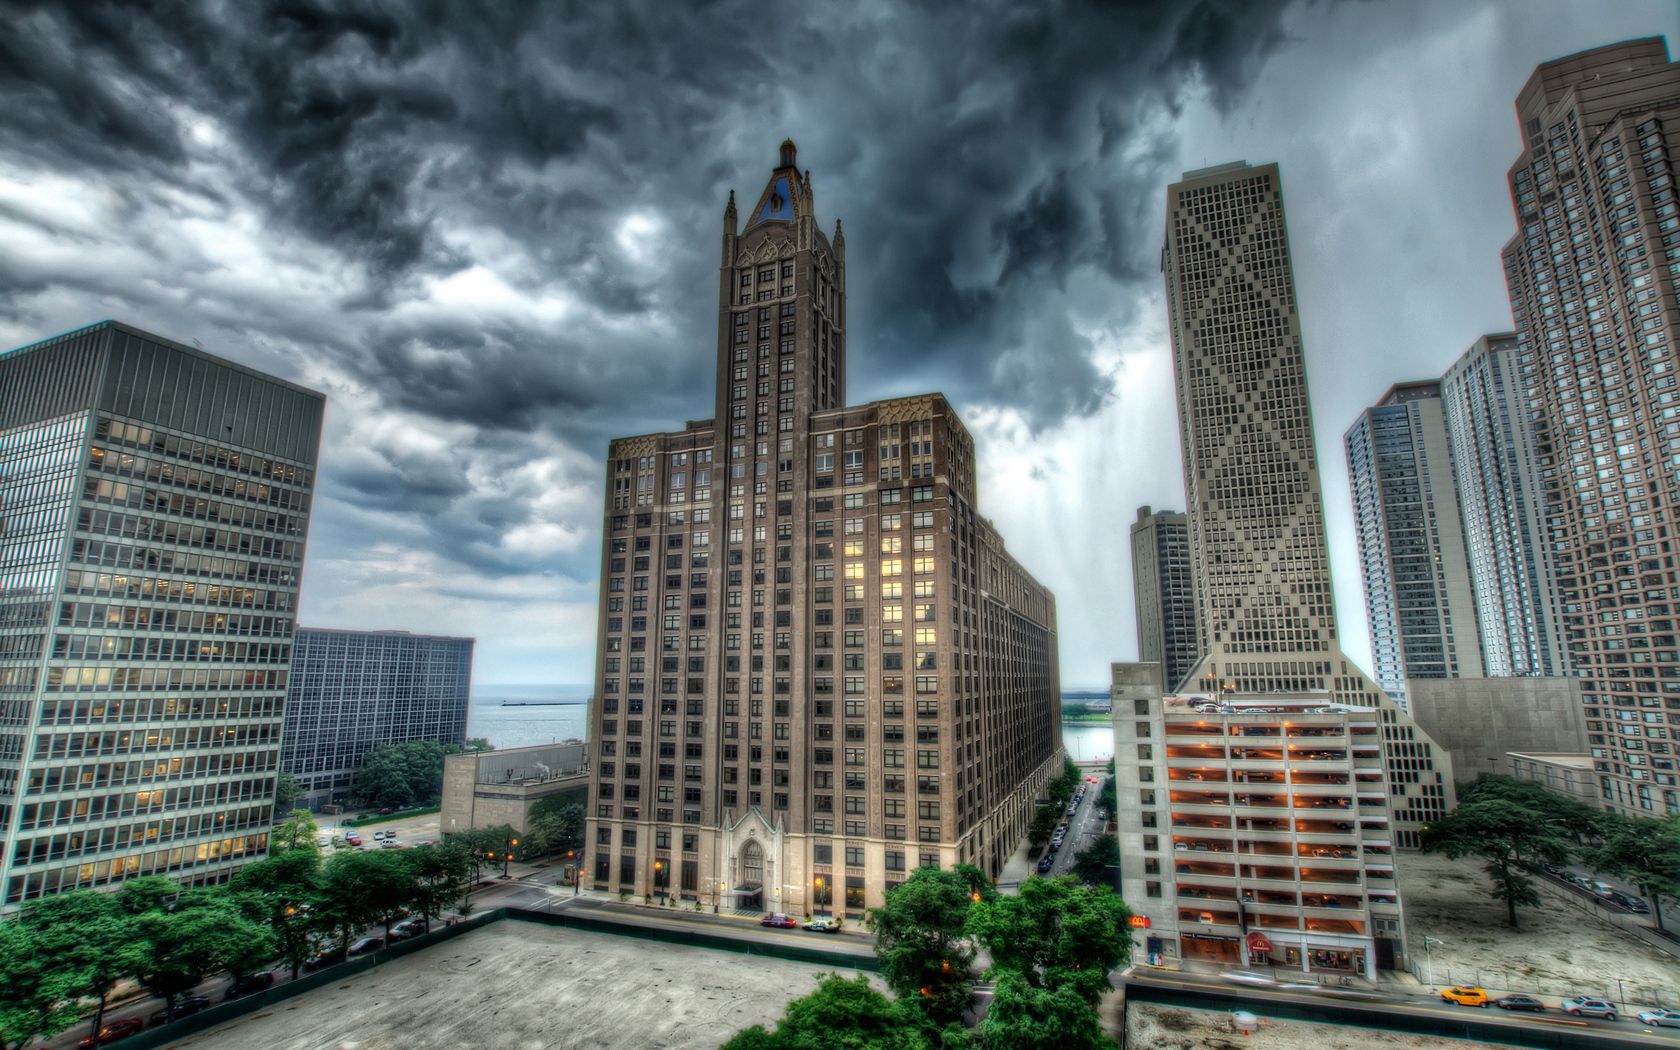 chicago, cities, building, skyscrapers, hdr, street, illinois